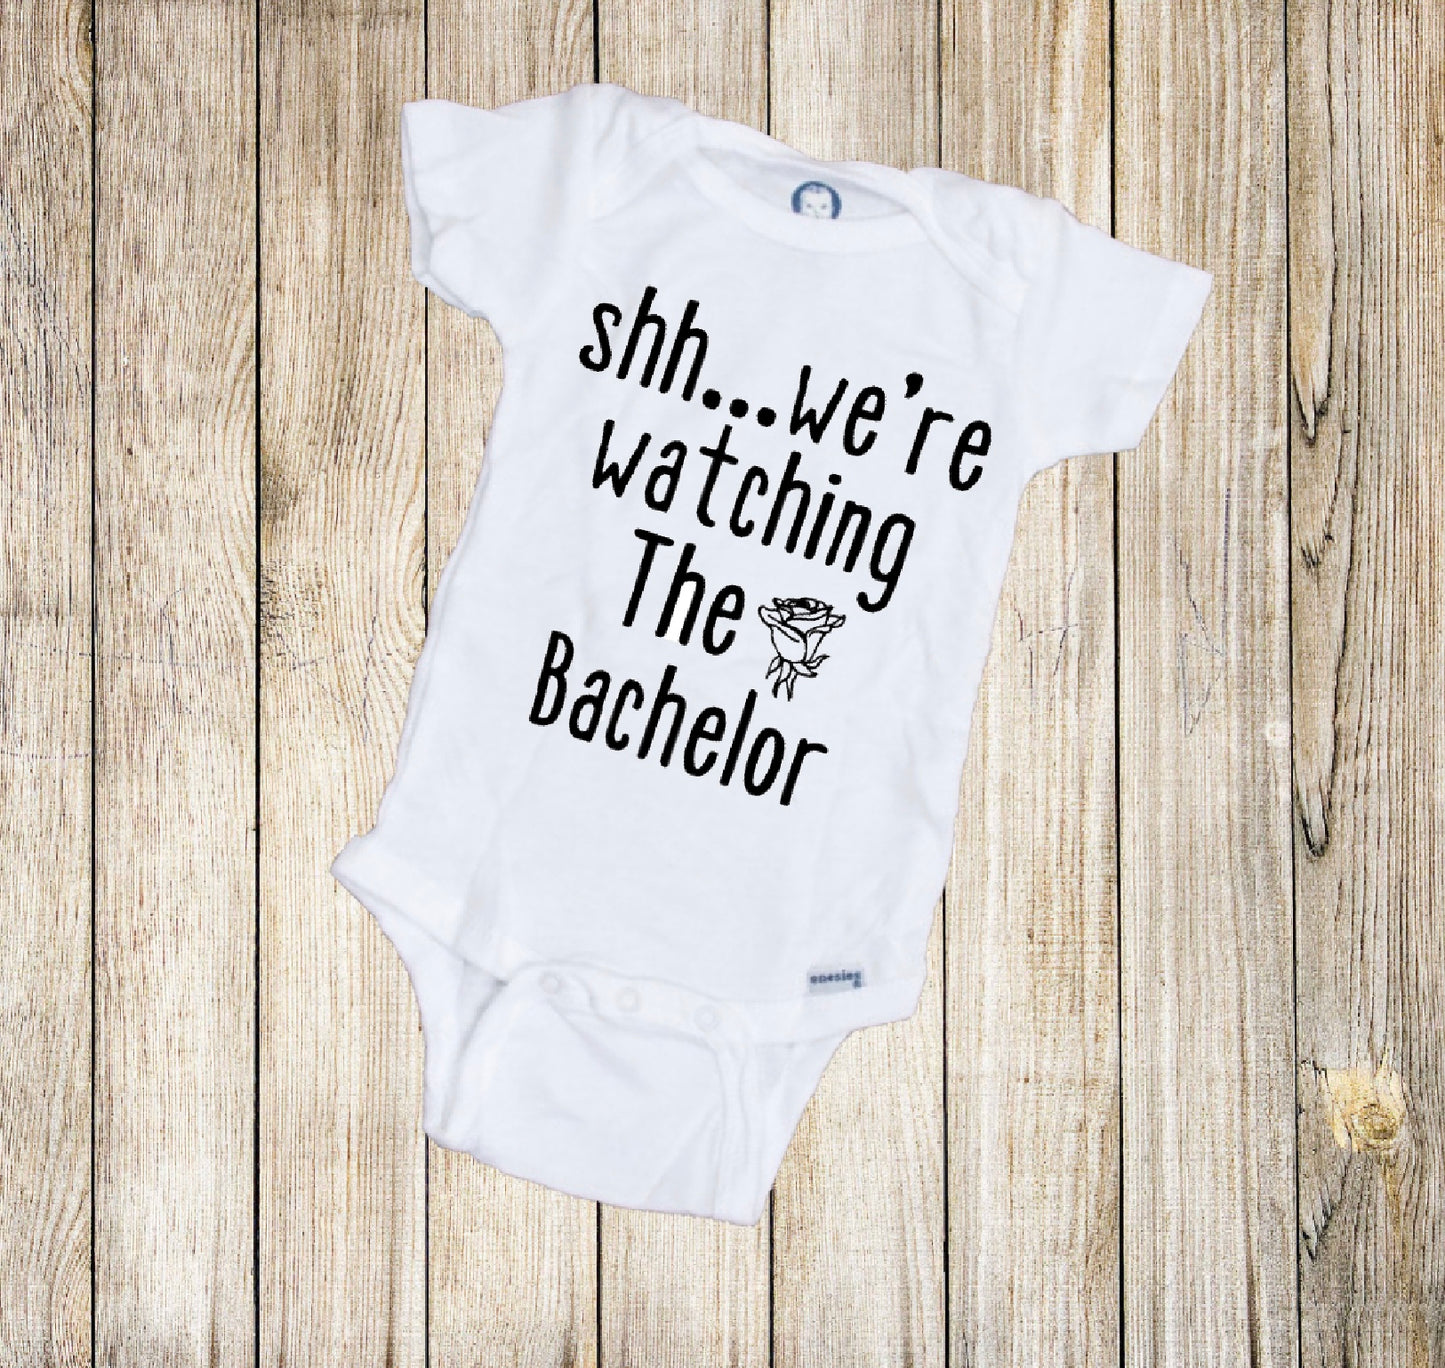 Shh…We’re Watching the Bachelor Baby Onesie®